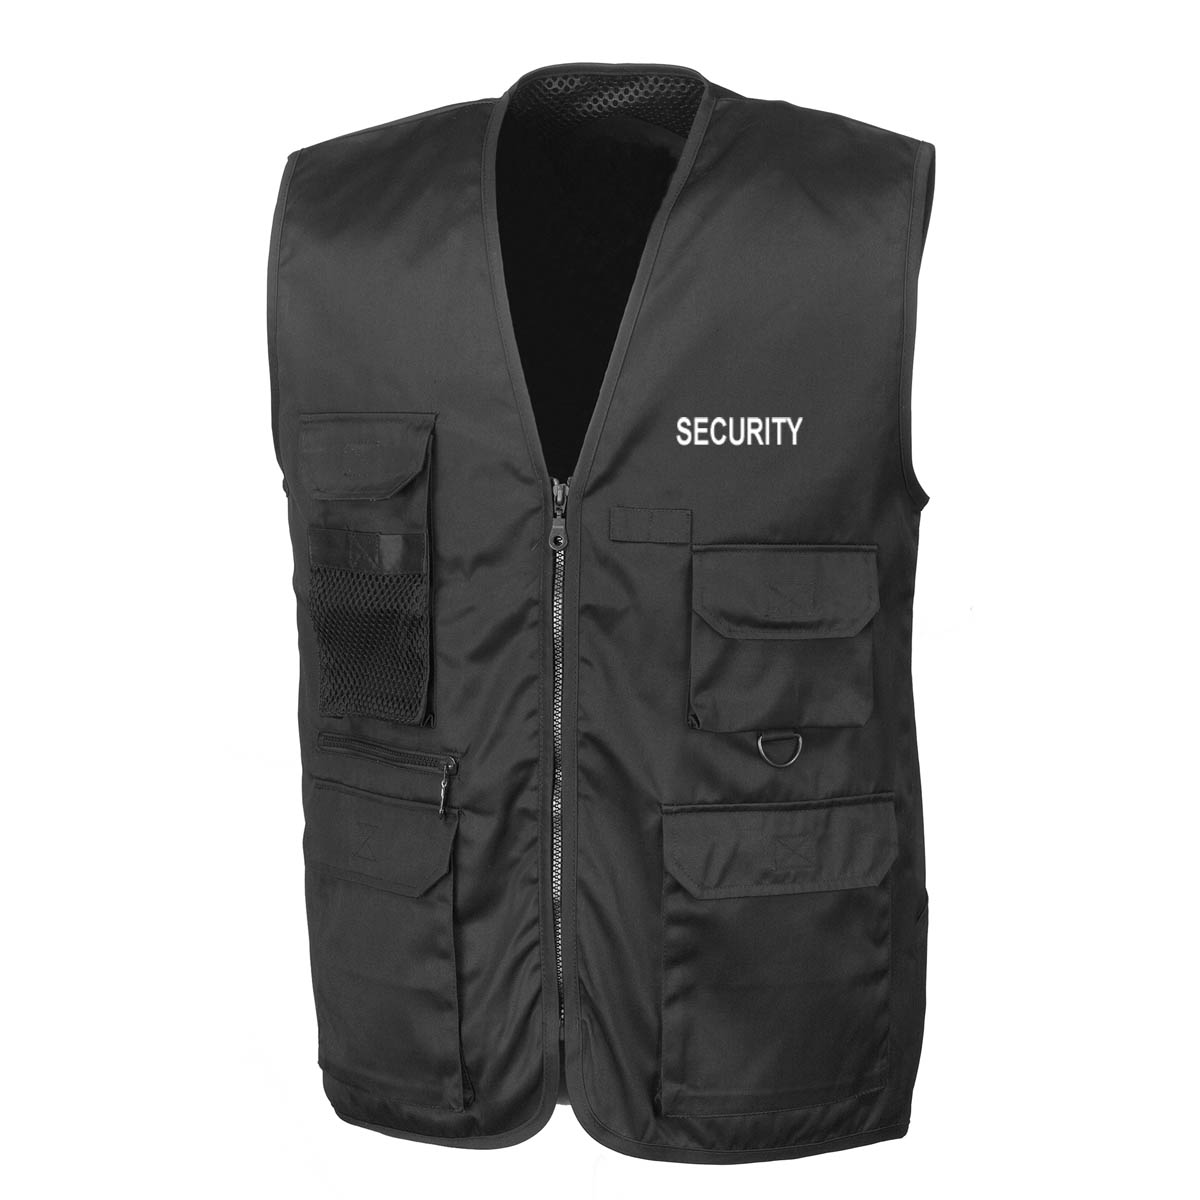 RE45A_SECURITY-FRONT